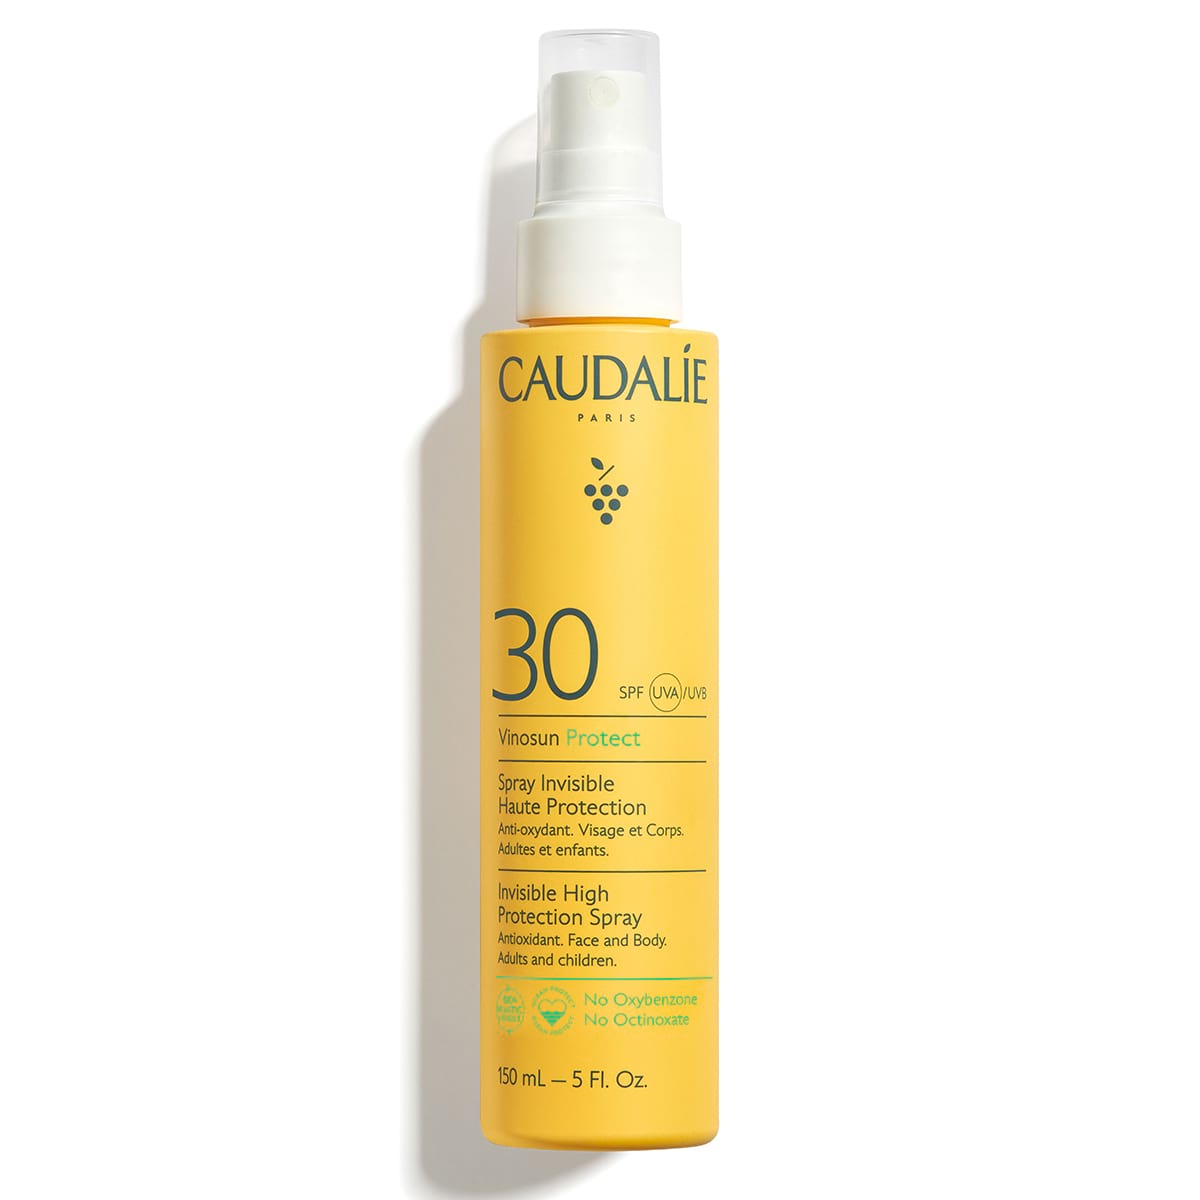 caudalie-invisible-high-protection-spray-spf30-150ml-mamaspharmacy-1